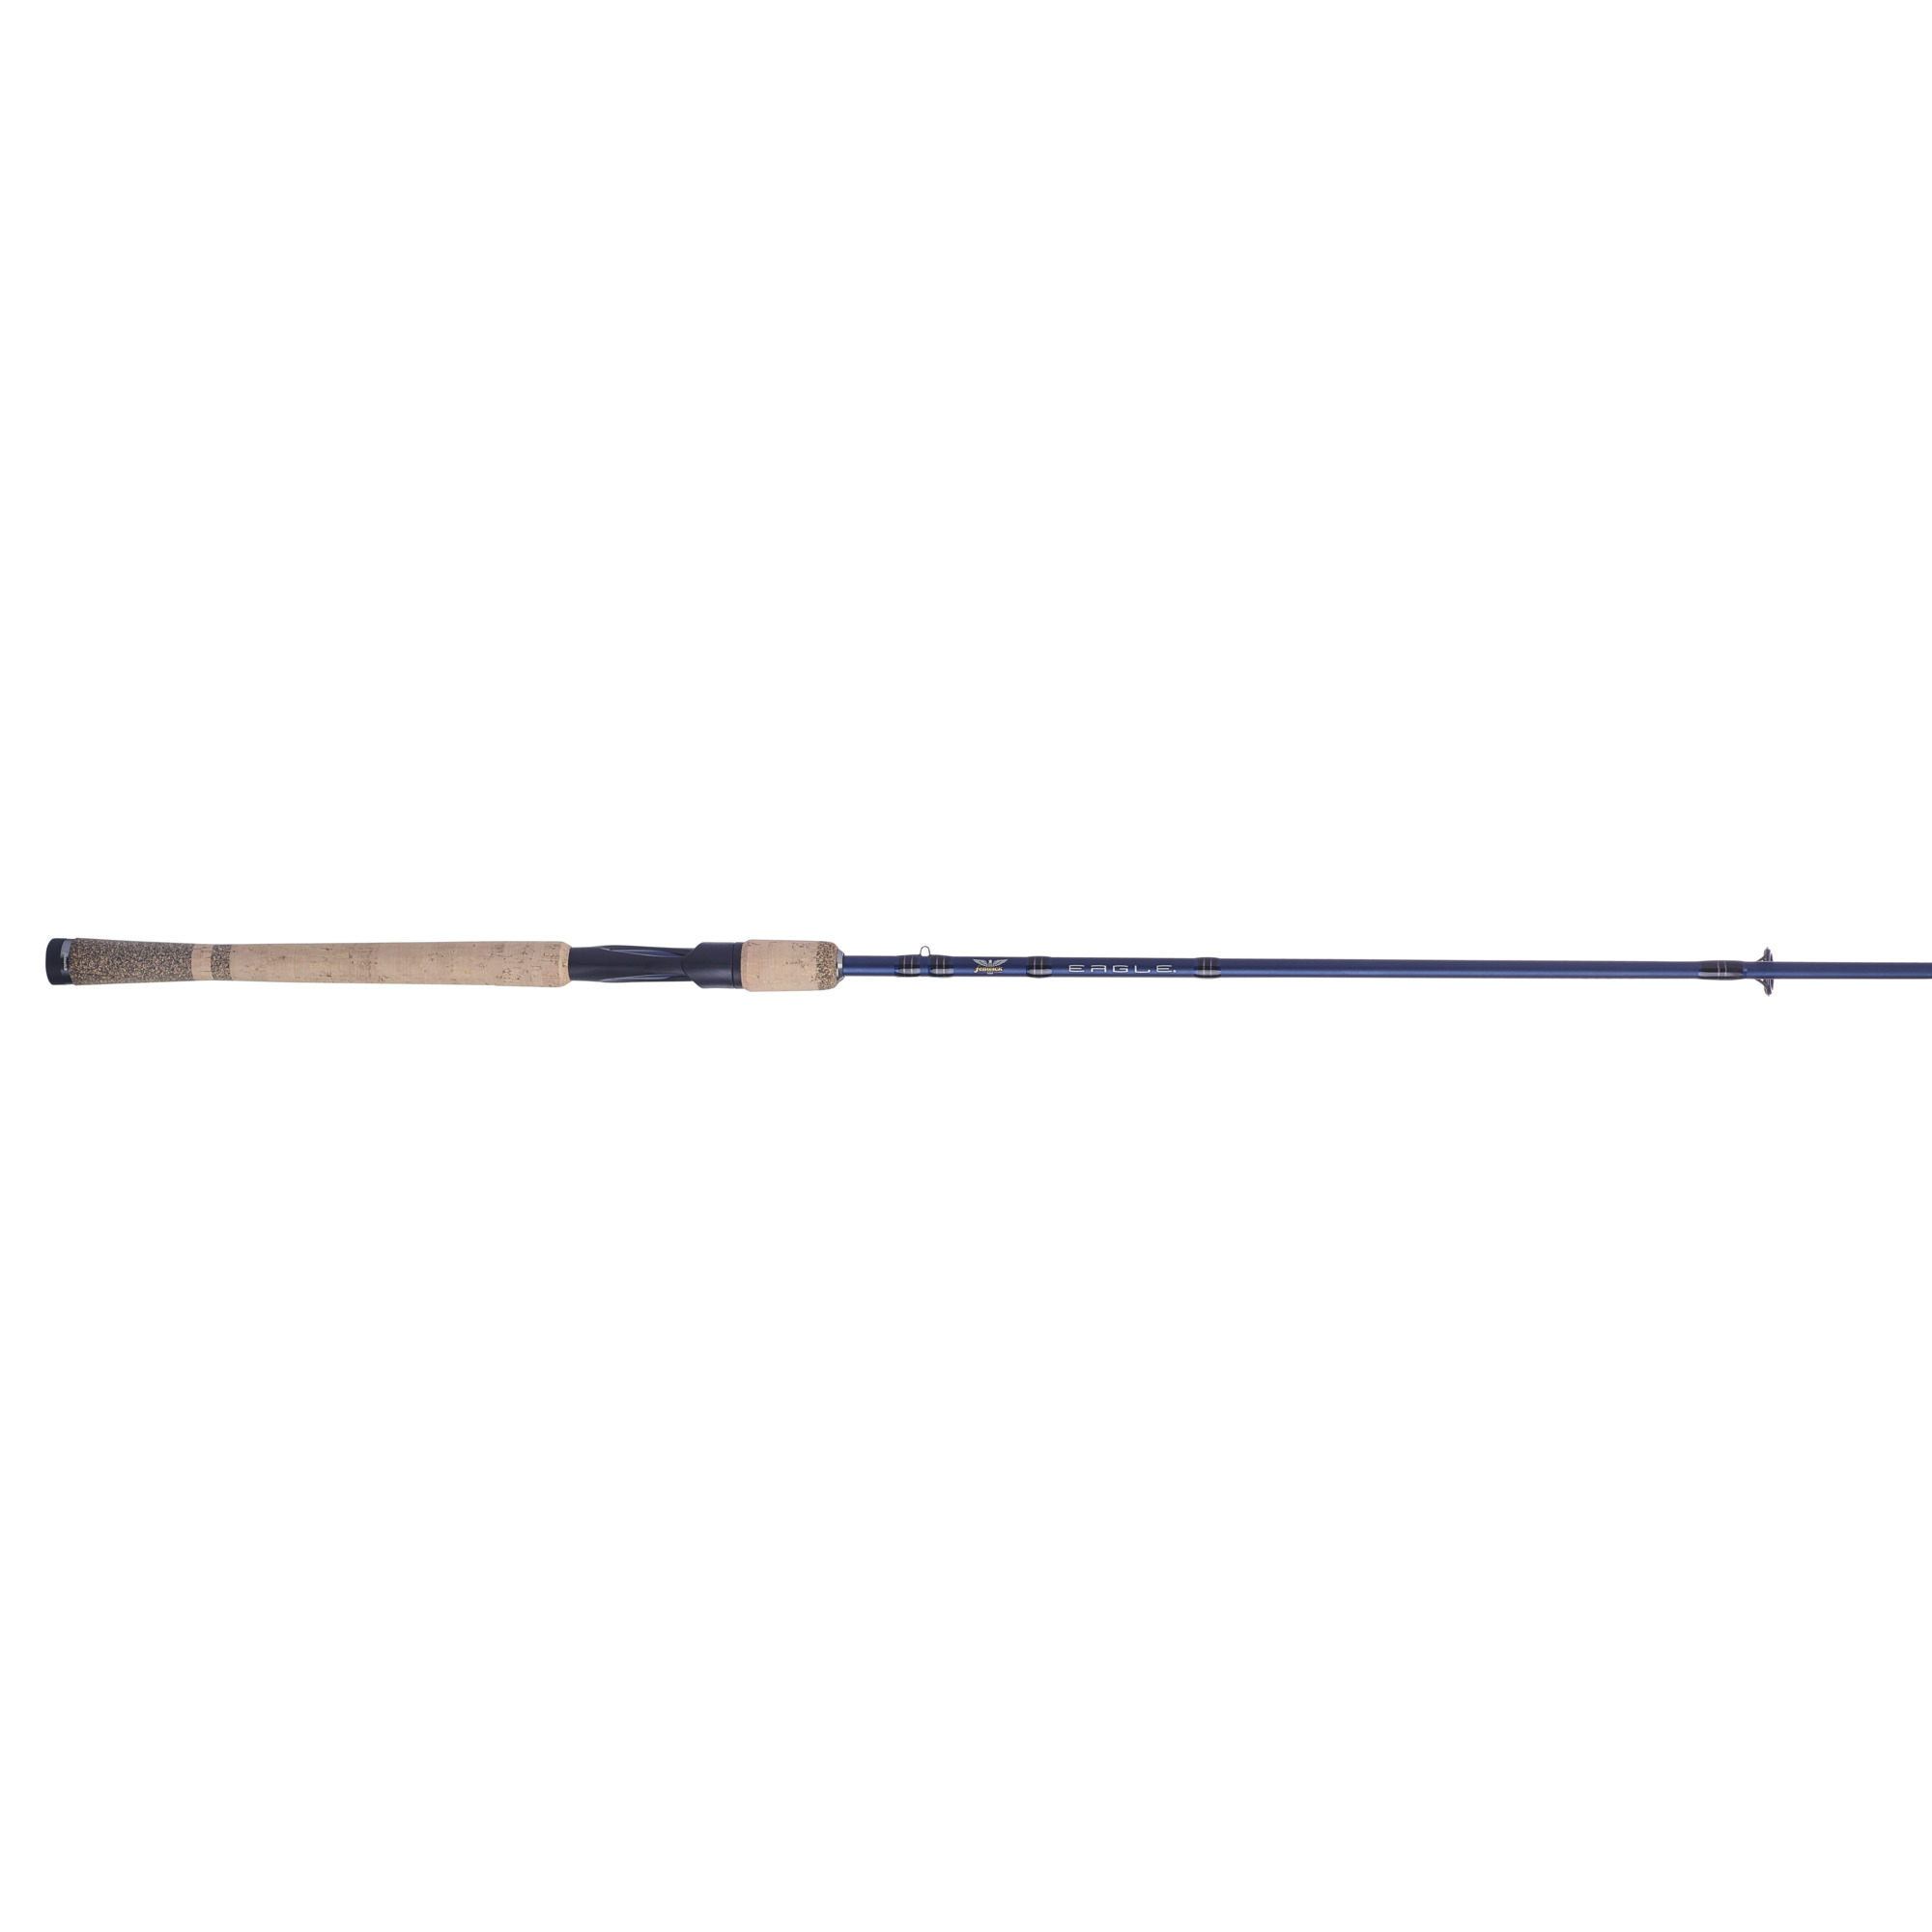 Fenwick Eagle Spinning Rod, Medium-Heavy 2 Piece, Salmon/Steelhead 10-20lb,  24 Ton Graphite, Prem Cork, Tach Grip, SS Guide with Alum Oxite Insrts  EAG106MH-MS-2 with Free S&H — CampSaver